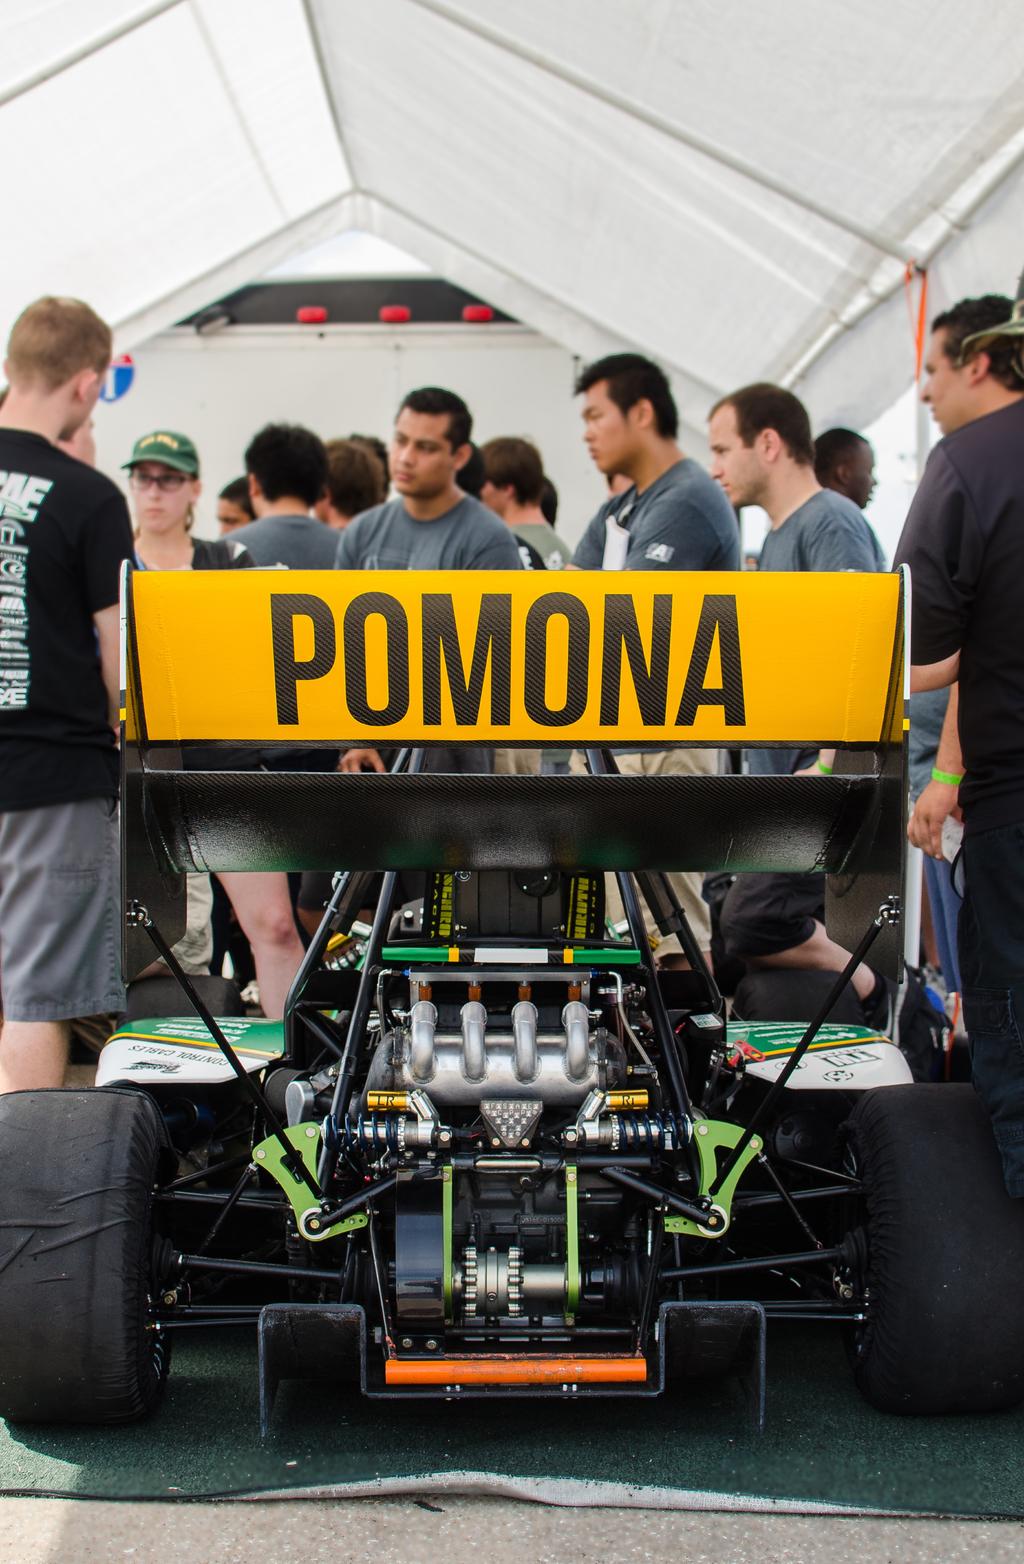 (Society of Automotive Engineers) sanctions FSAE through speciﬁc rules and regulations that engage student knowledge, creativity, and imagination.